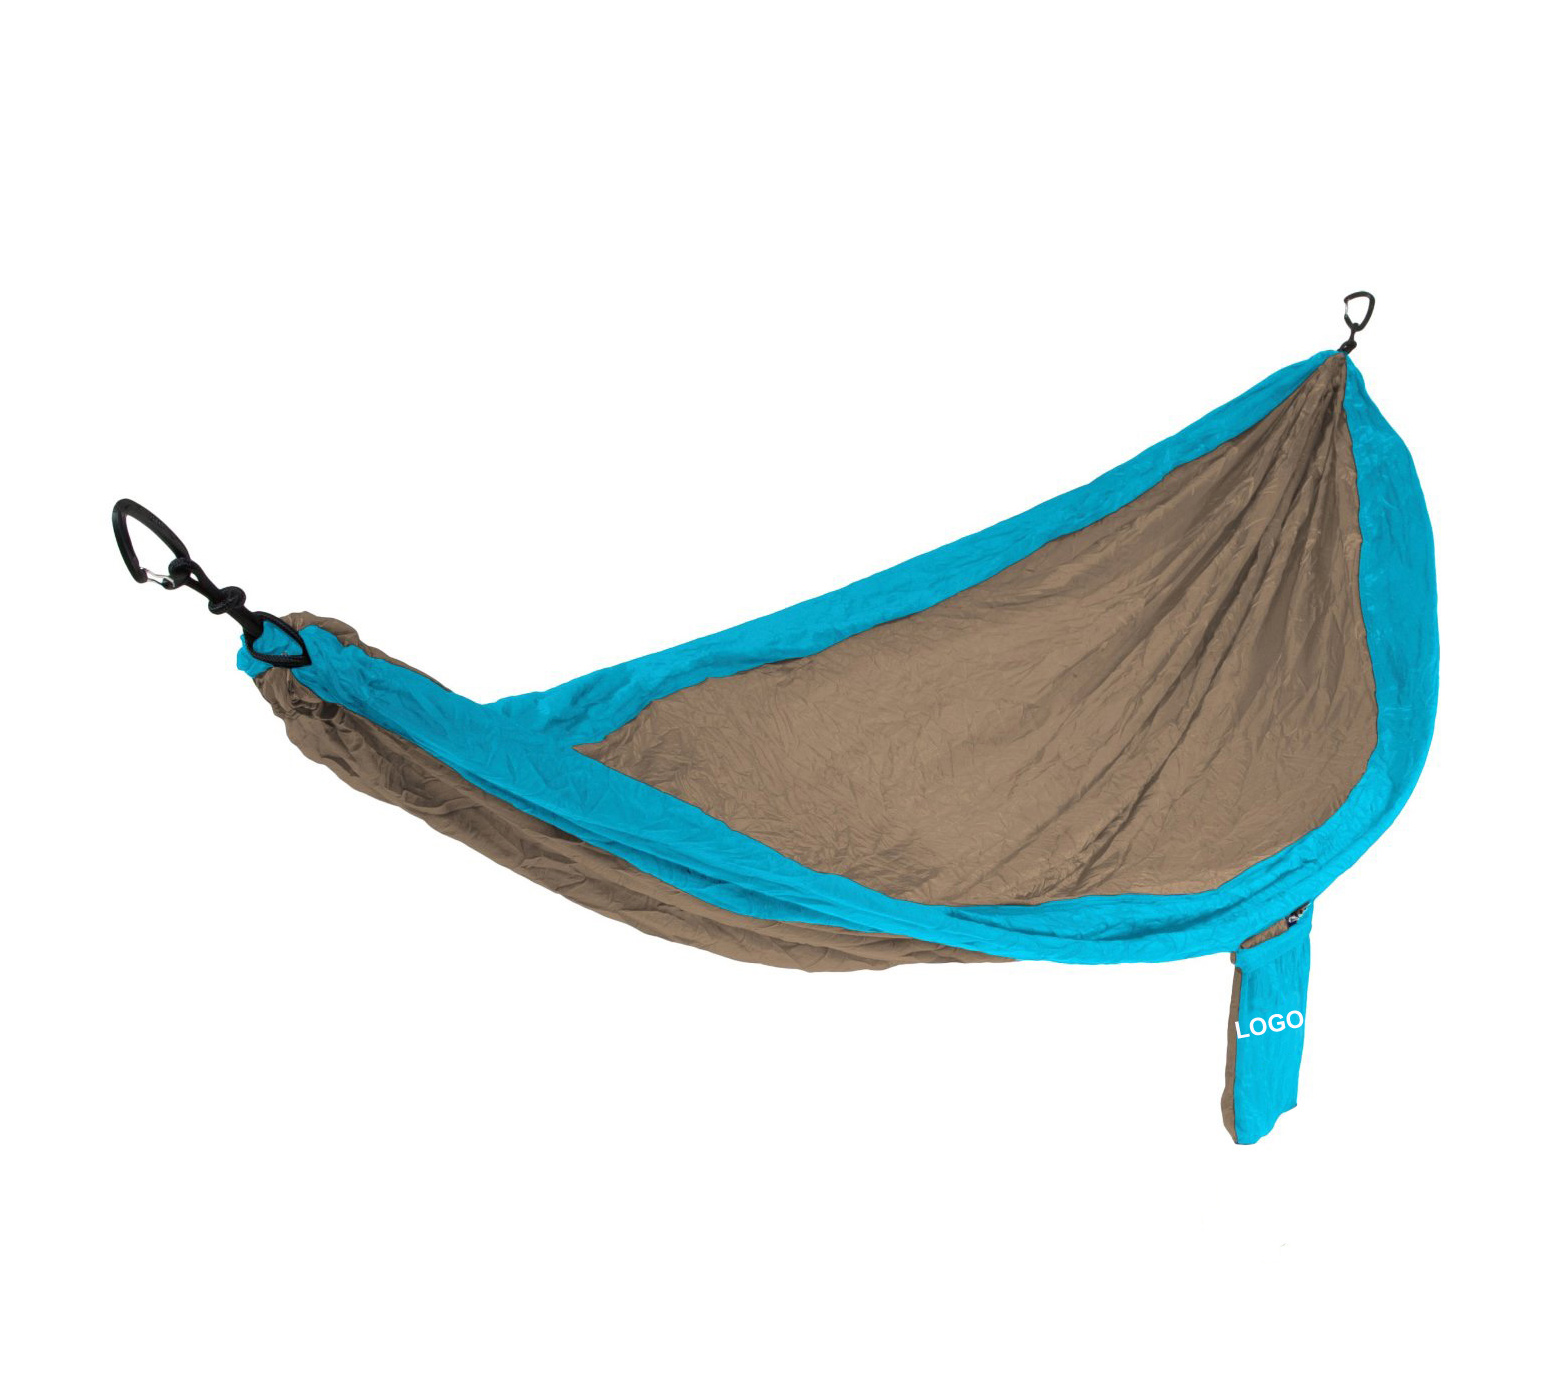  Most Easiest USA Camp Hammock with Free Tree Strap and Carabiners